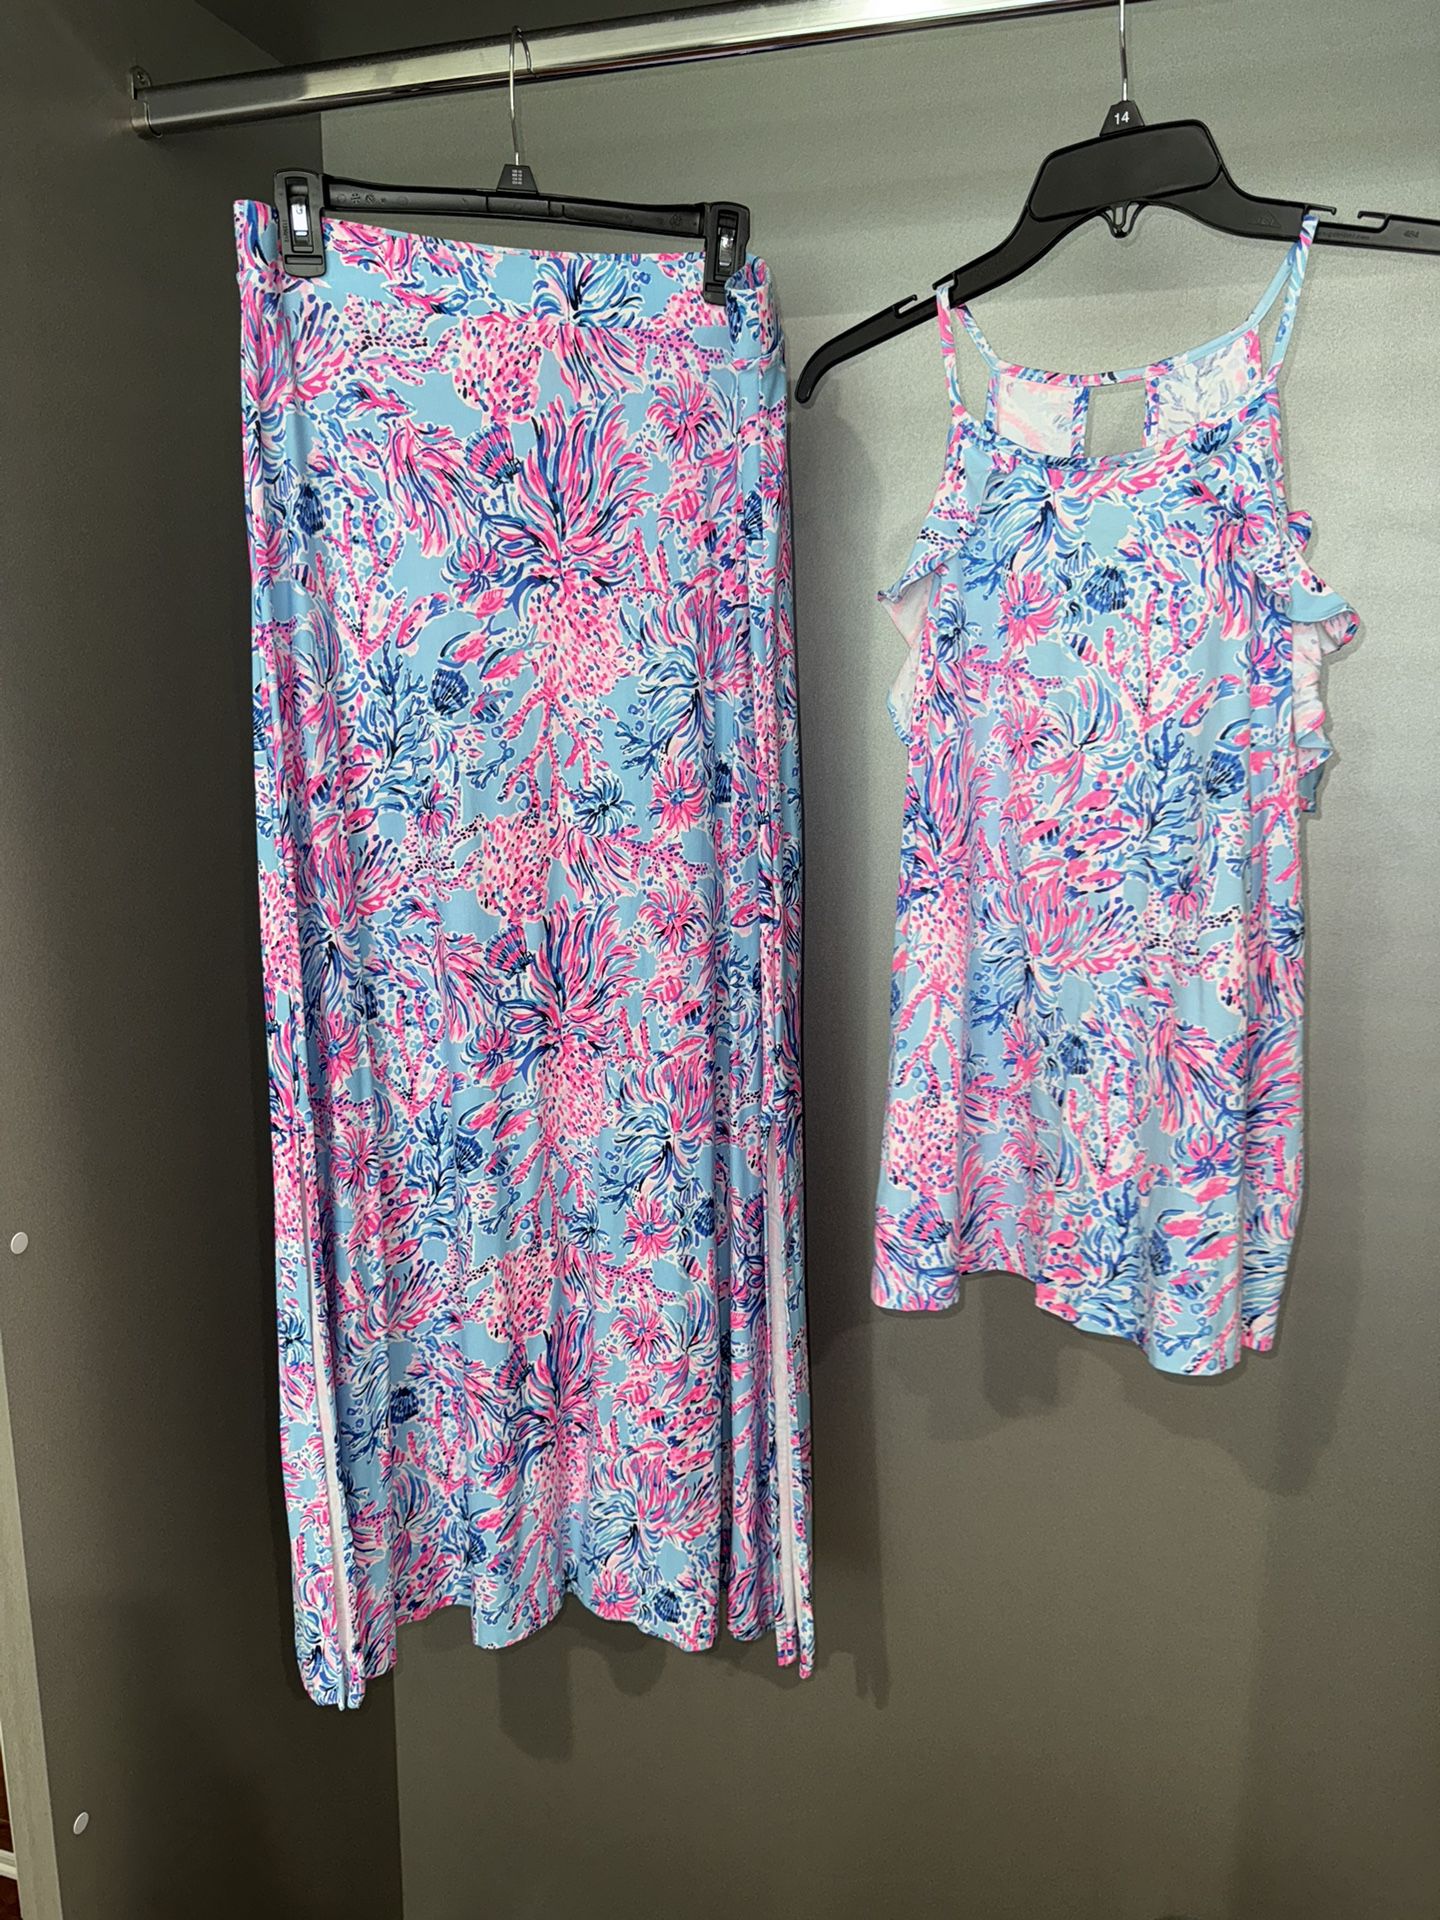 Women’s Size Large Lilly Pulitzer Maxi Skirt & Top